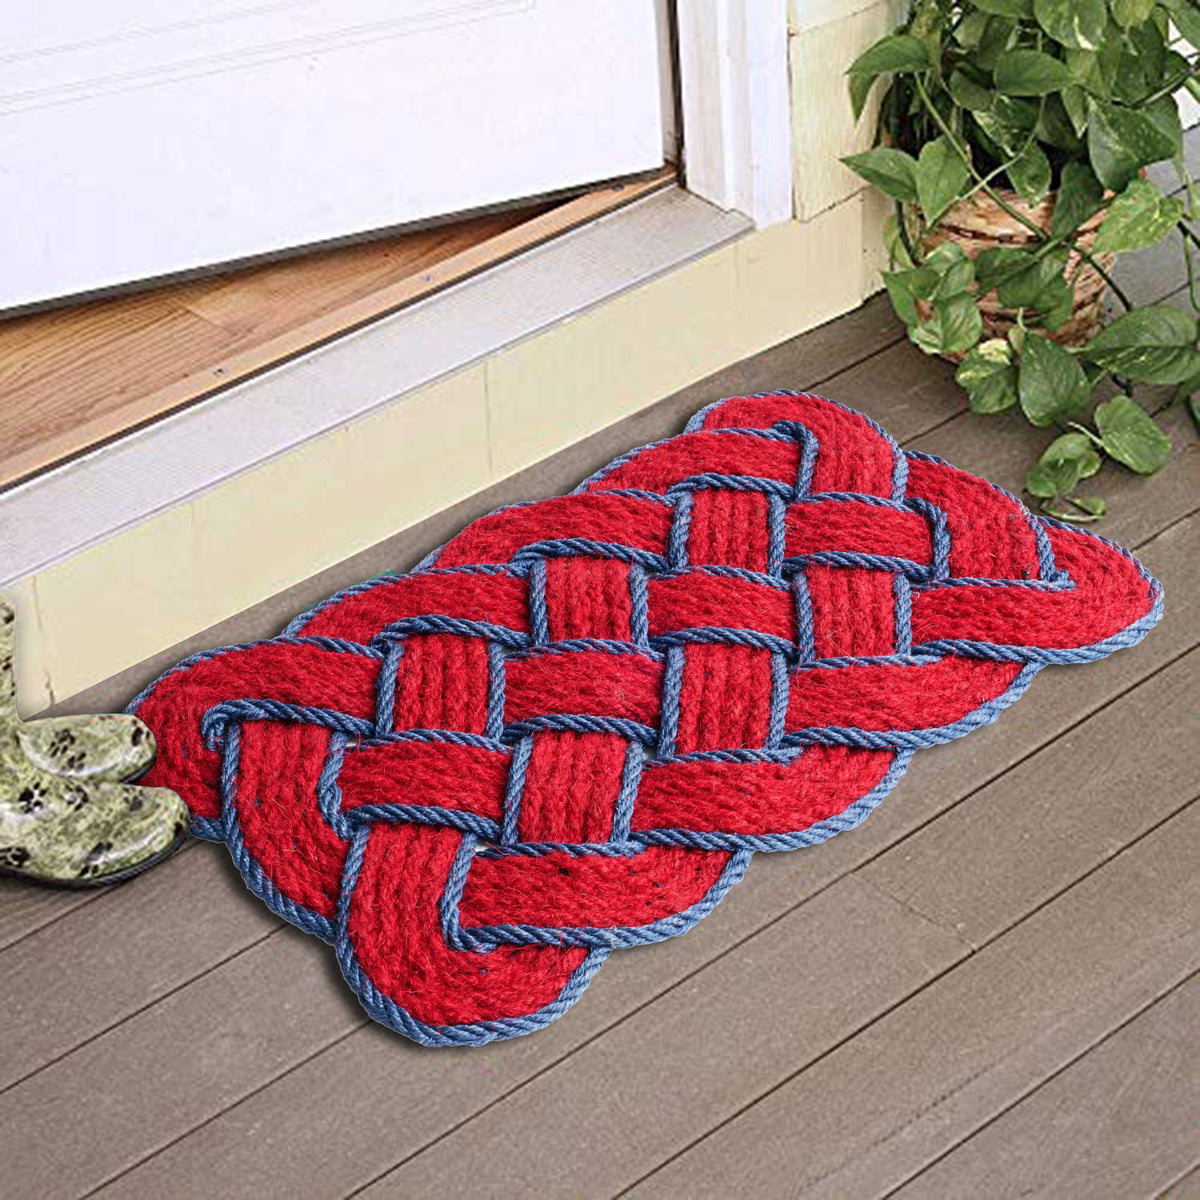 OnlyMat Red and Blue Lovers Knot - 100% Natural Handloom Coir Mat - In